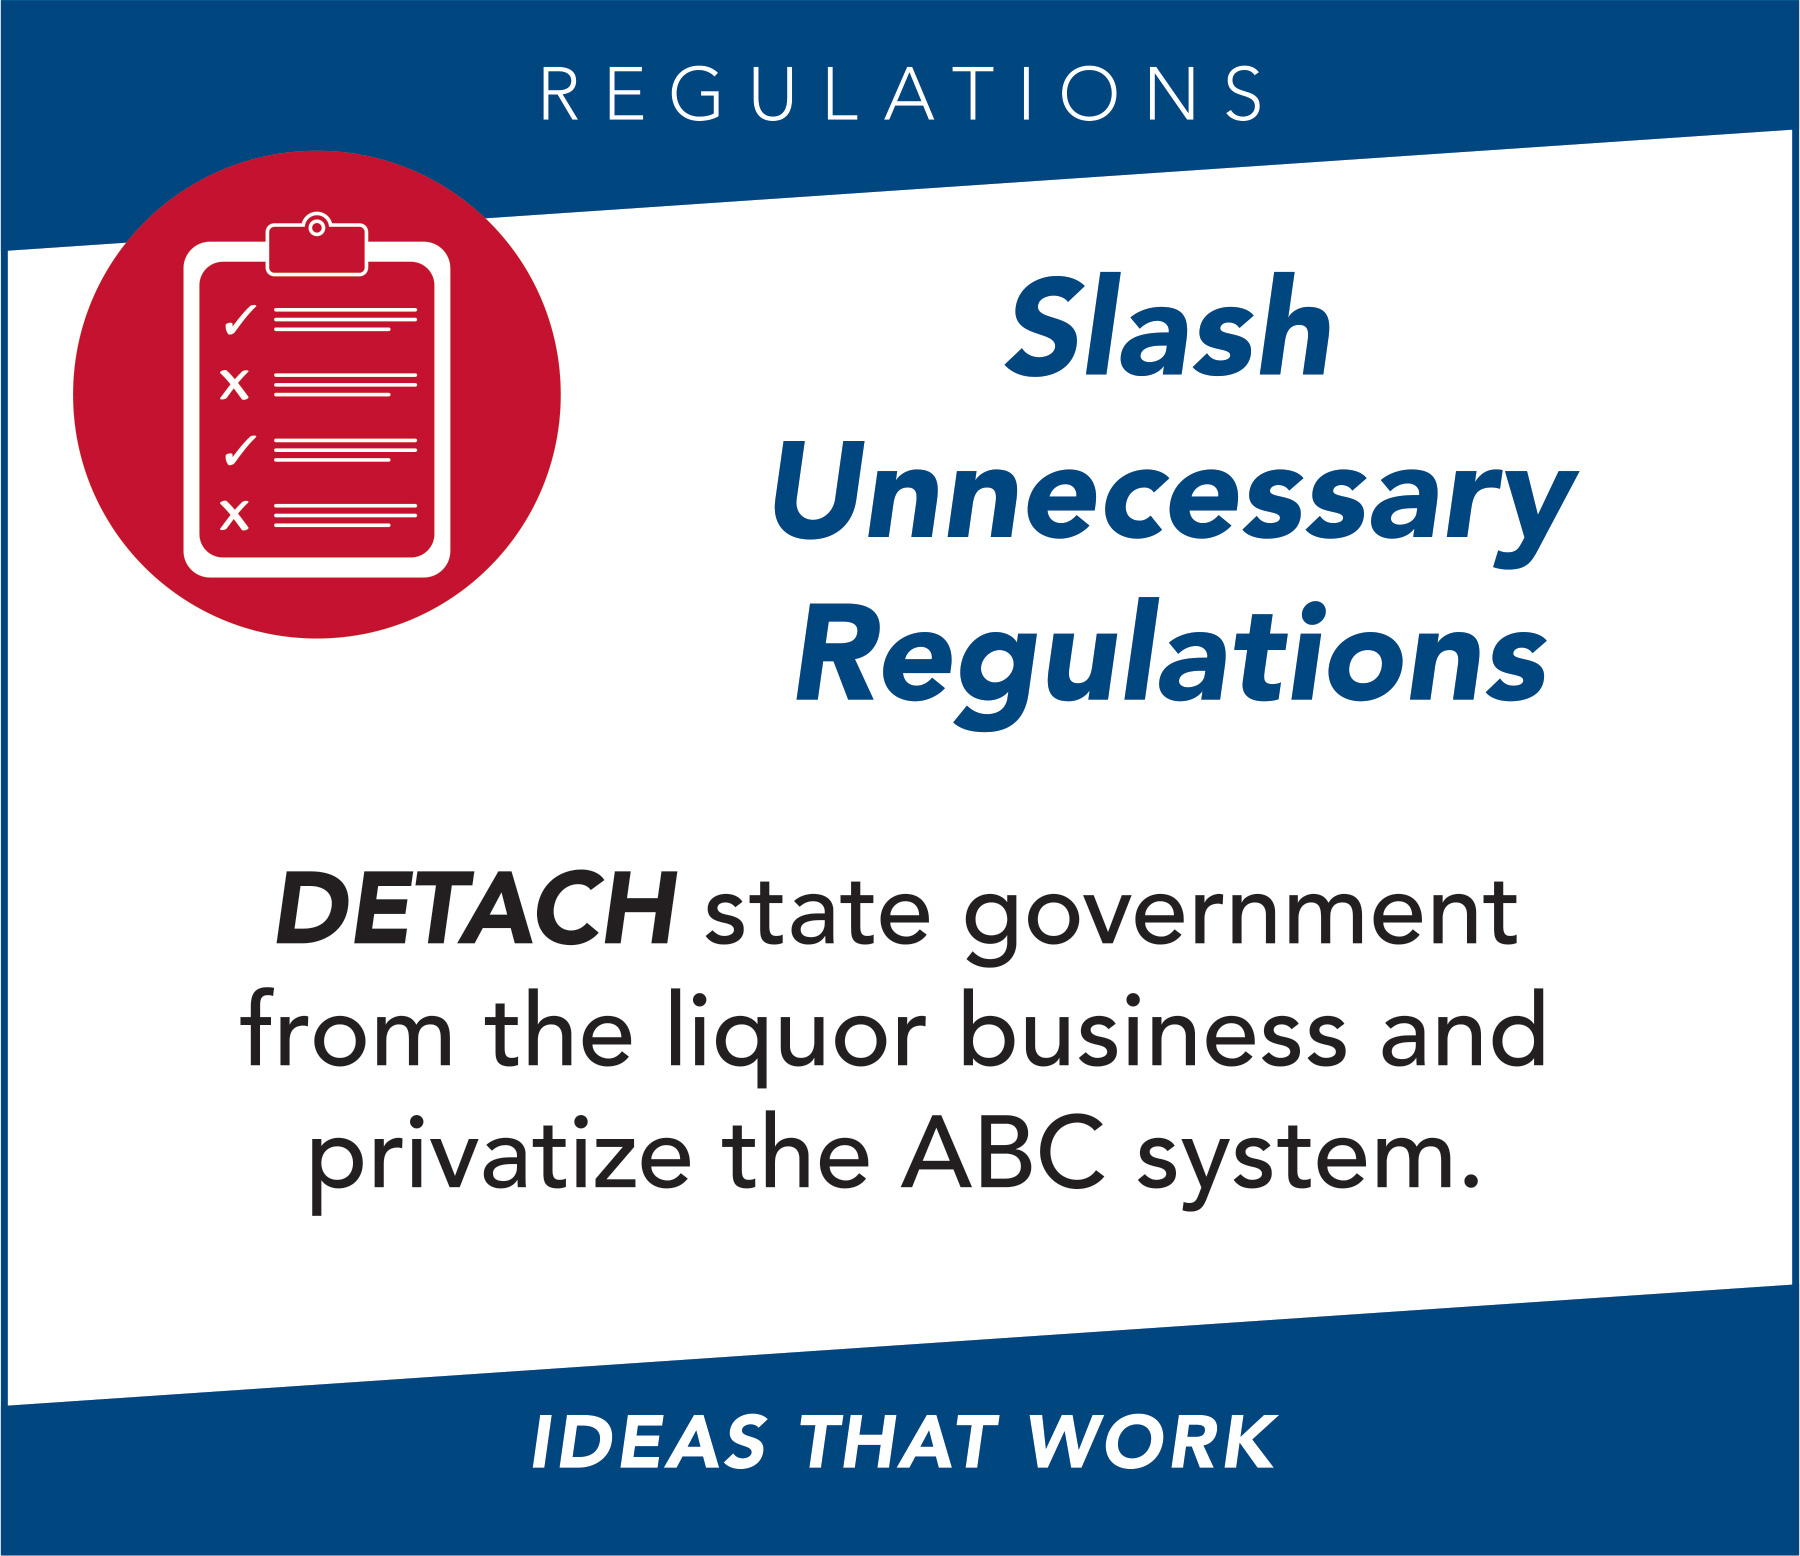 DETACH state government from the liquor business and ...